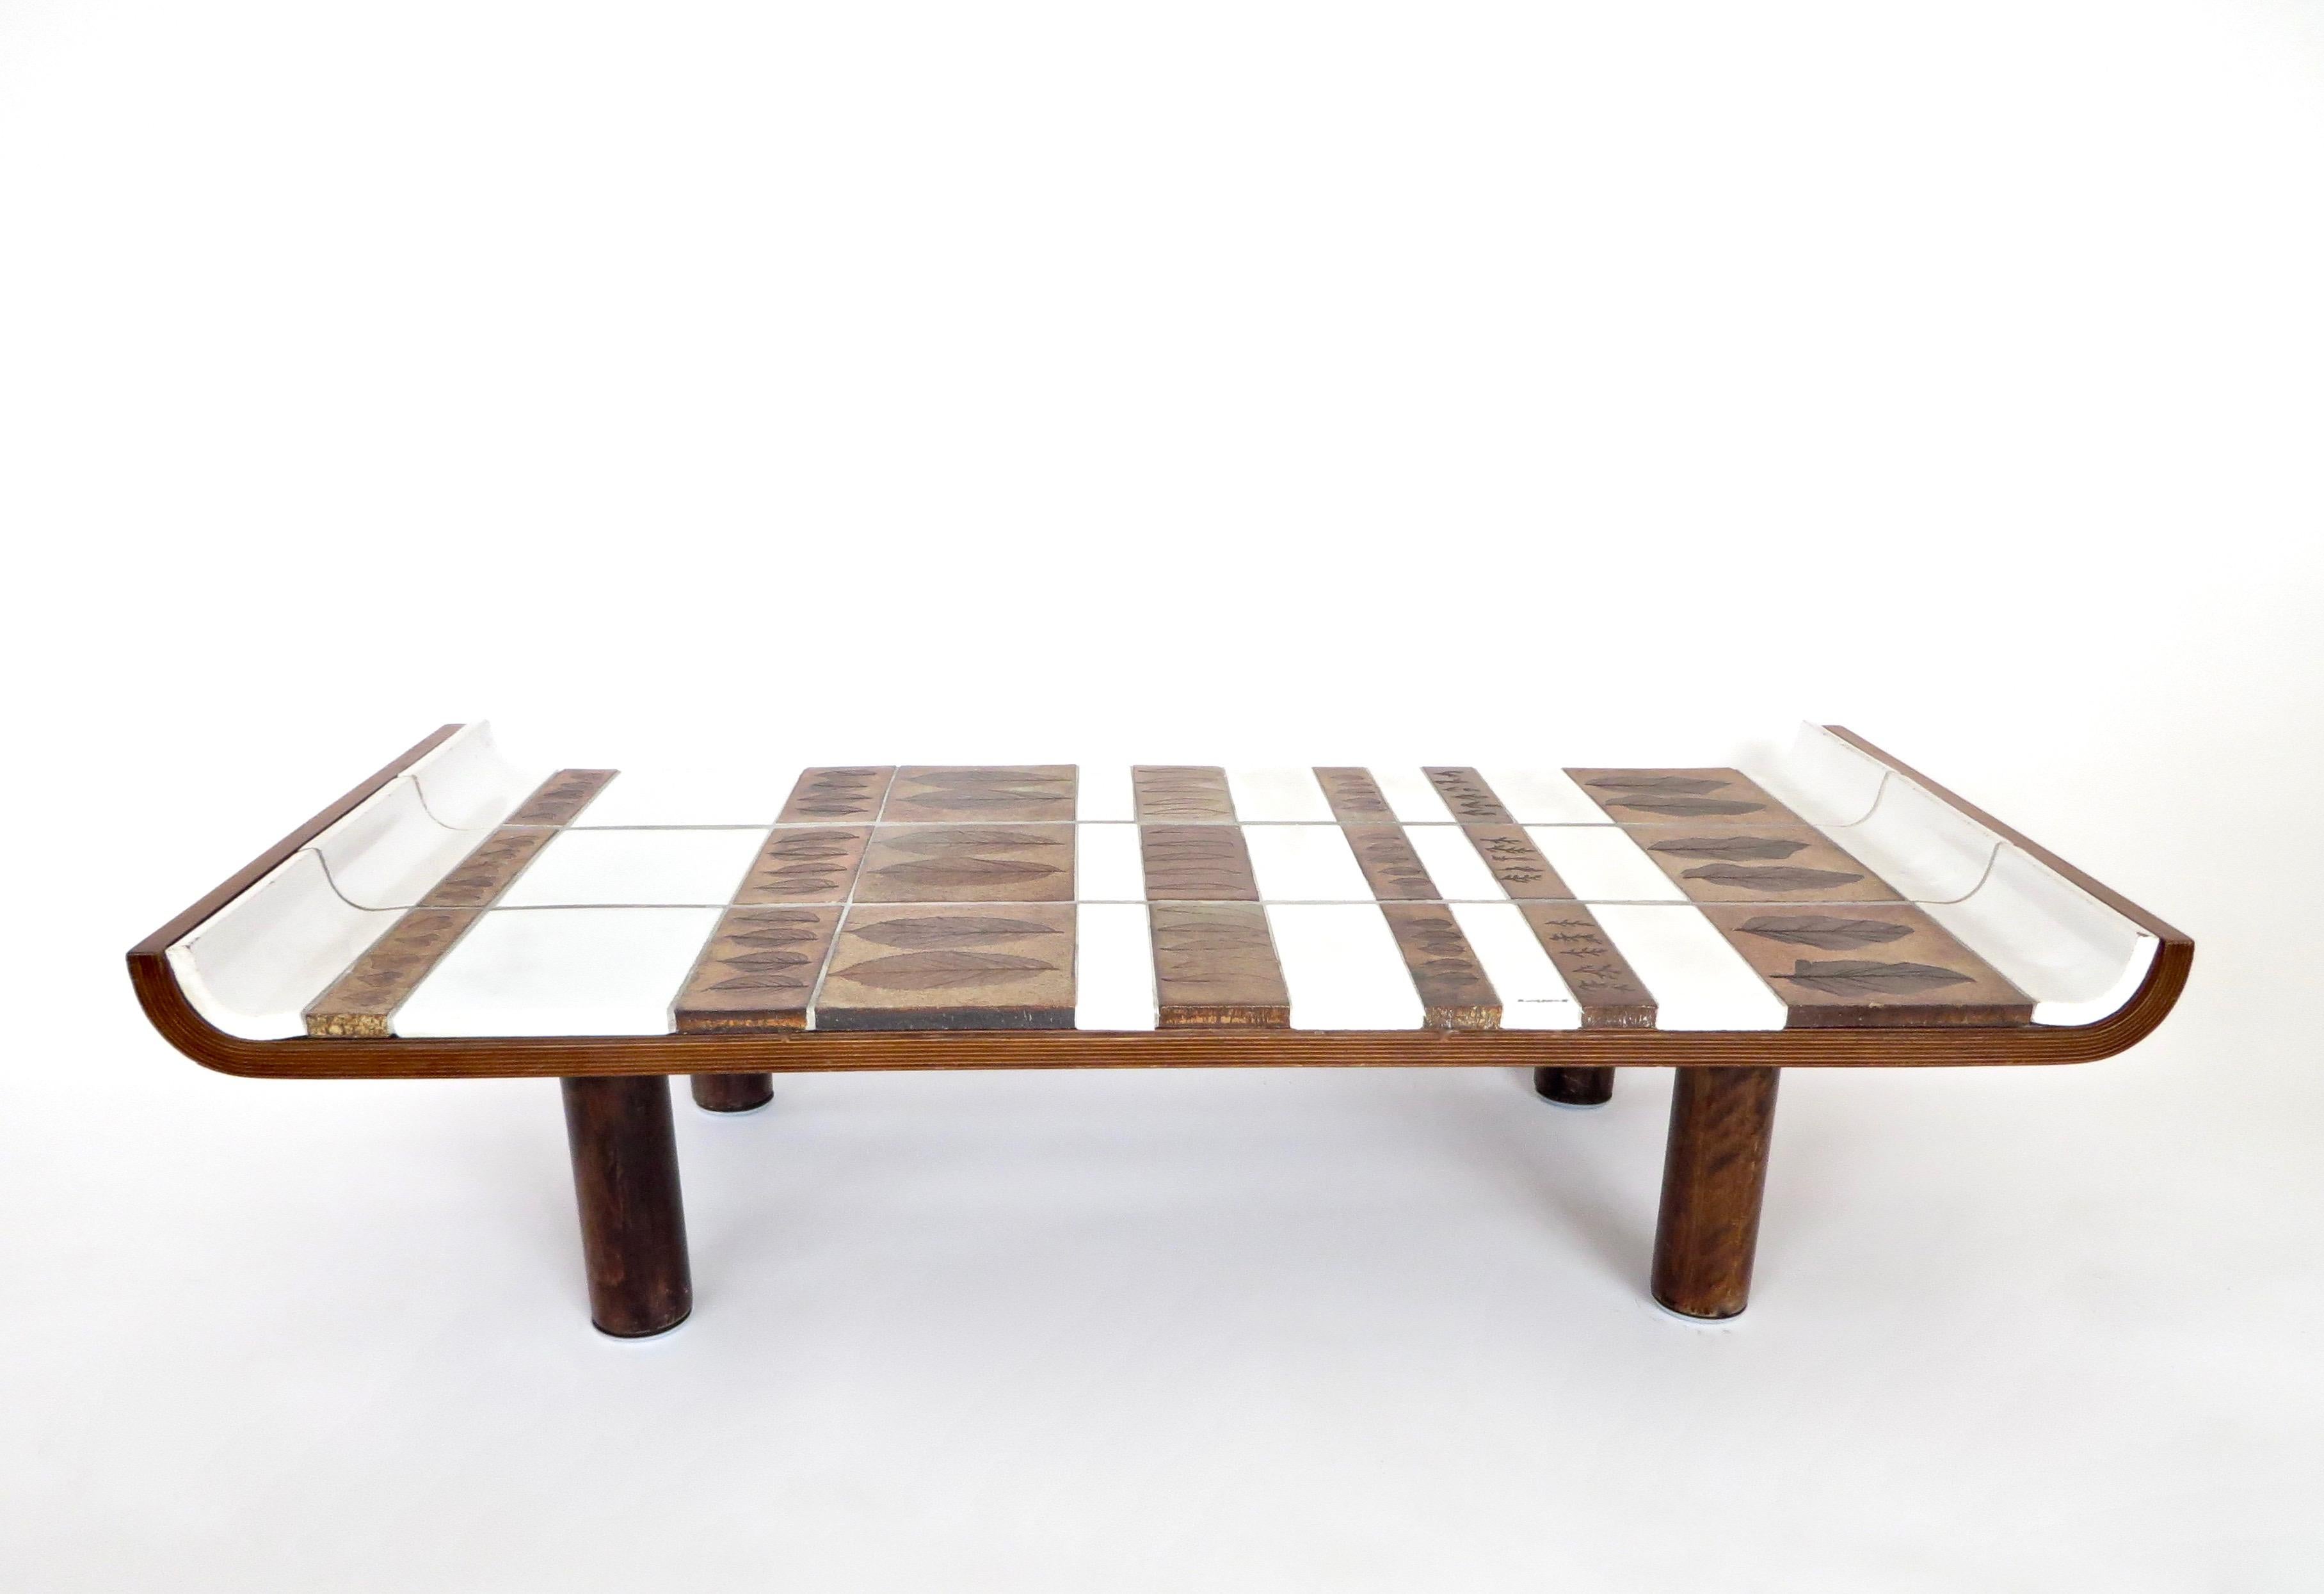 Roger Capron Pagode model ceramic coffee table, circa 1960.
Oak frame supporting white glazed tiles and tones of brown ceramic tiles with impressed leaves in the ceramic in the iconic impressed leaf series of Roger Capron in the 1960s.
Capron worked